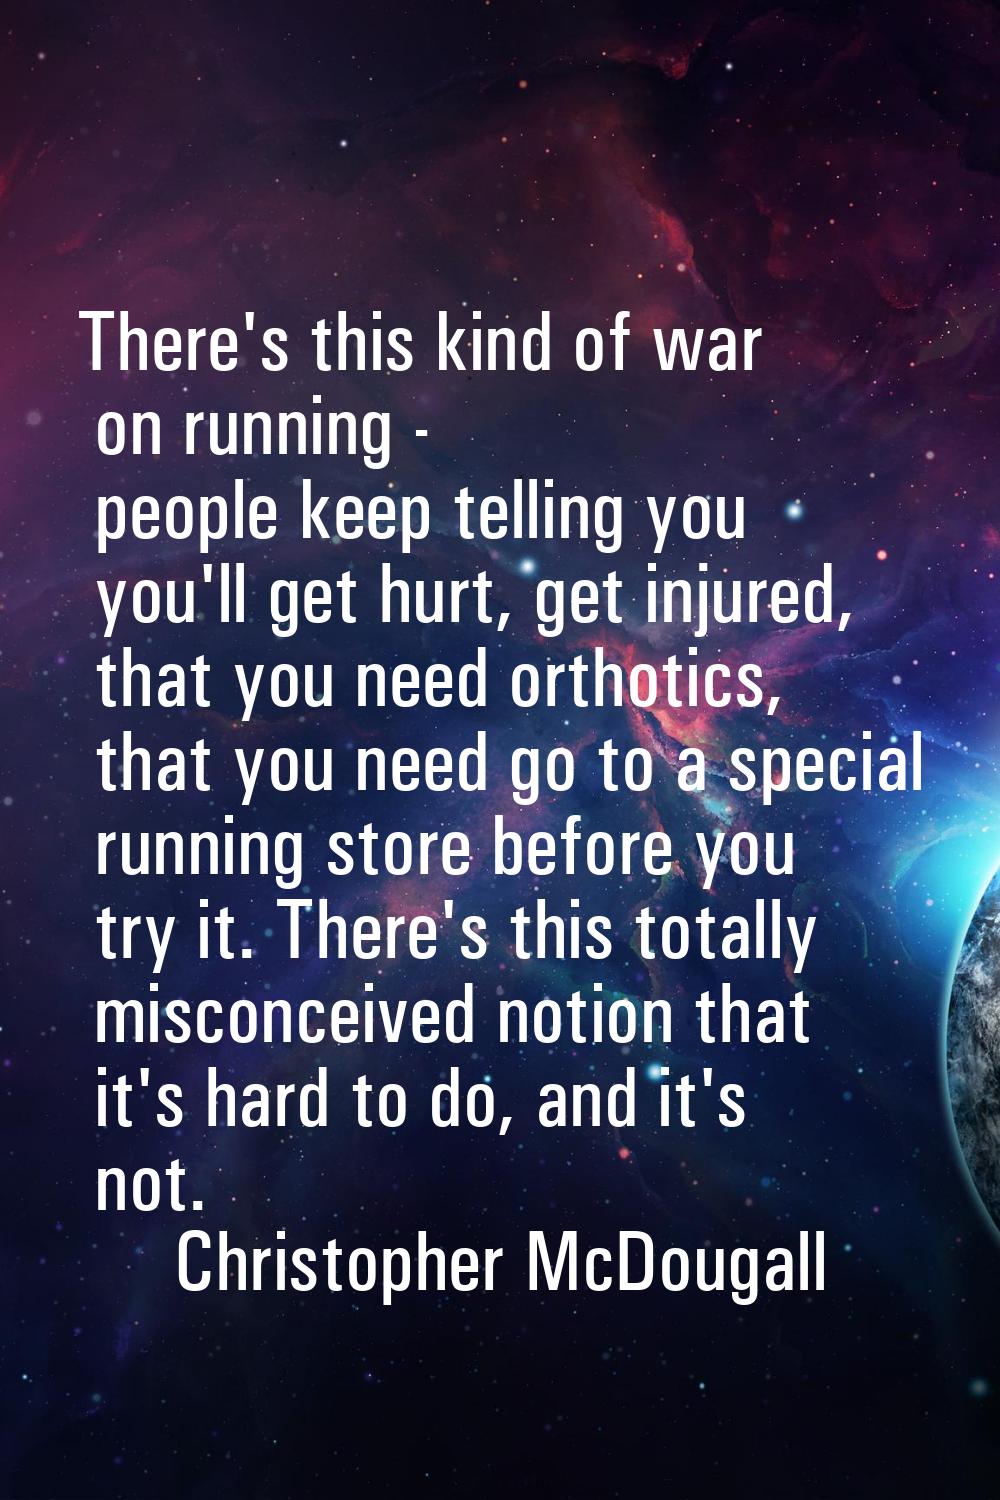 There's this kind of war on running - people keep telling you you'll get hurt, get injured, that yo